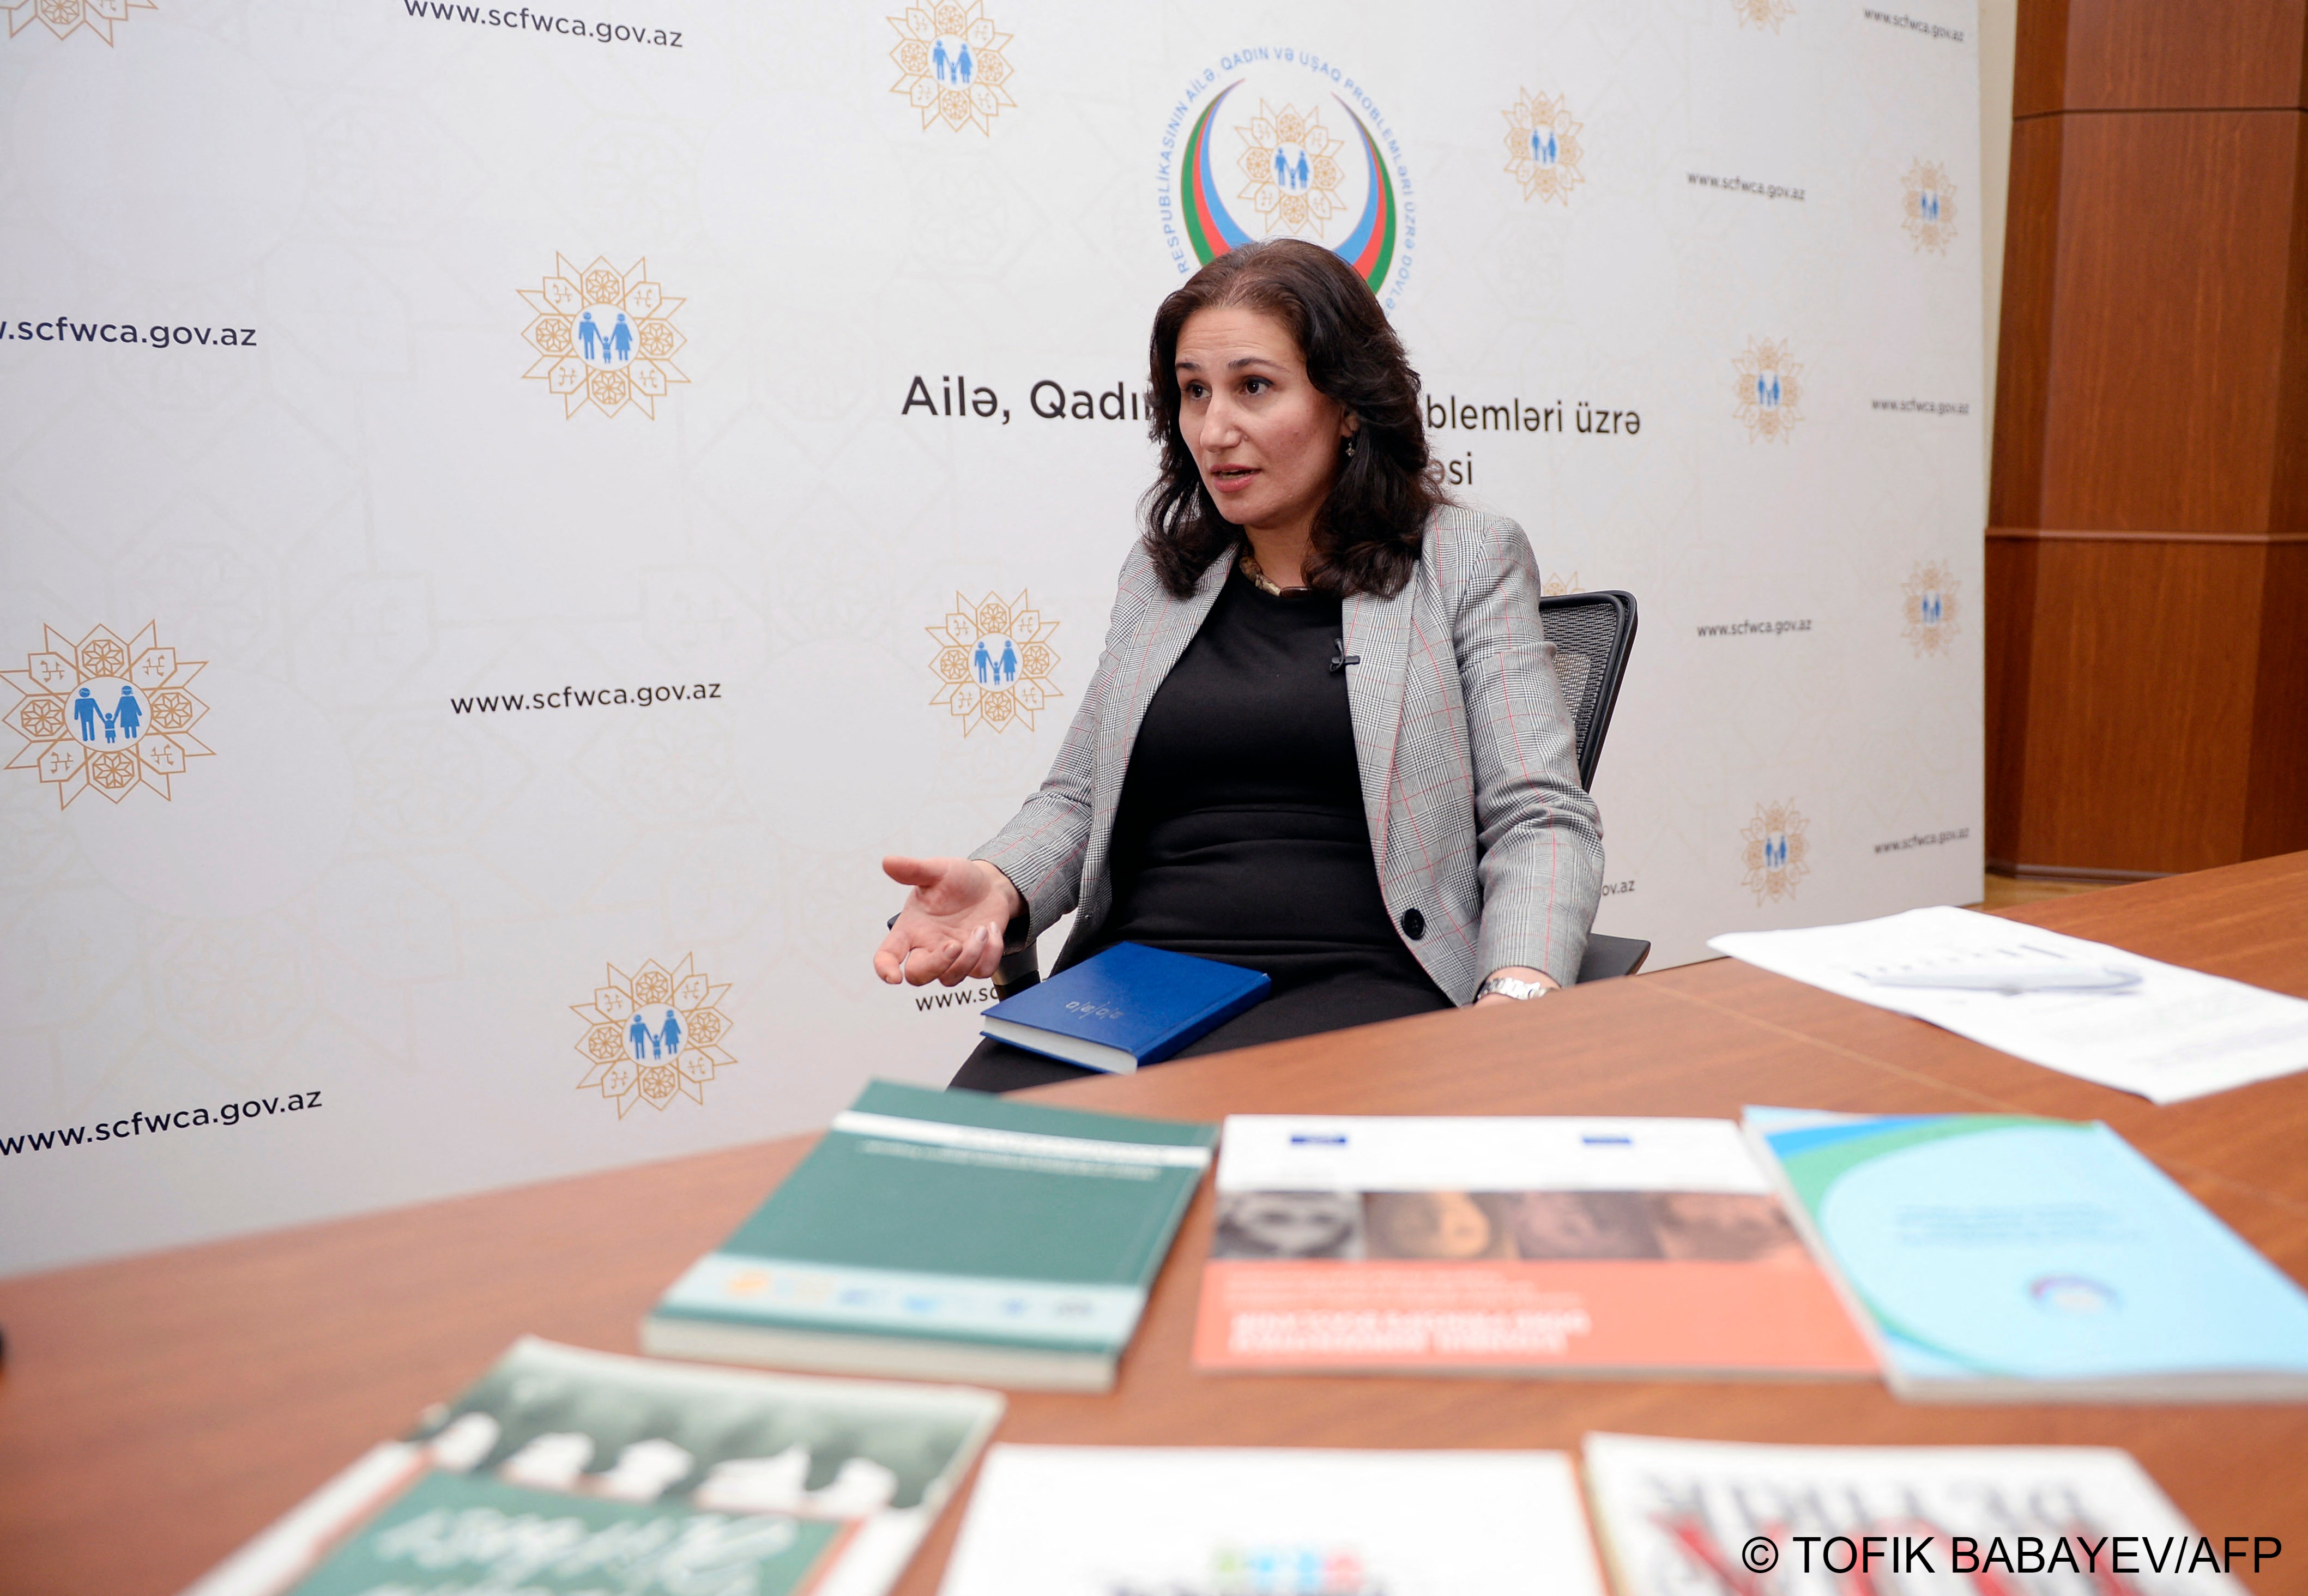 Taliya Ibrahimova, an official of Azerbaijan‘s state committee for women‘s affairs, speaks during an interview with AFP in Baku on 25 October 2021 (photo by Tofik BABAYEV/AFP)